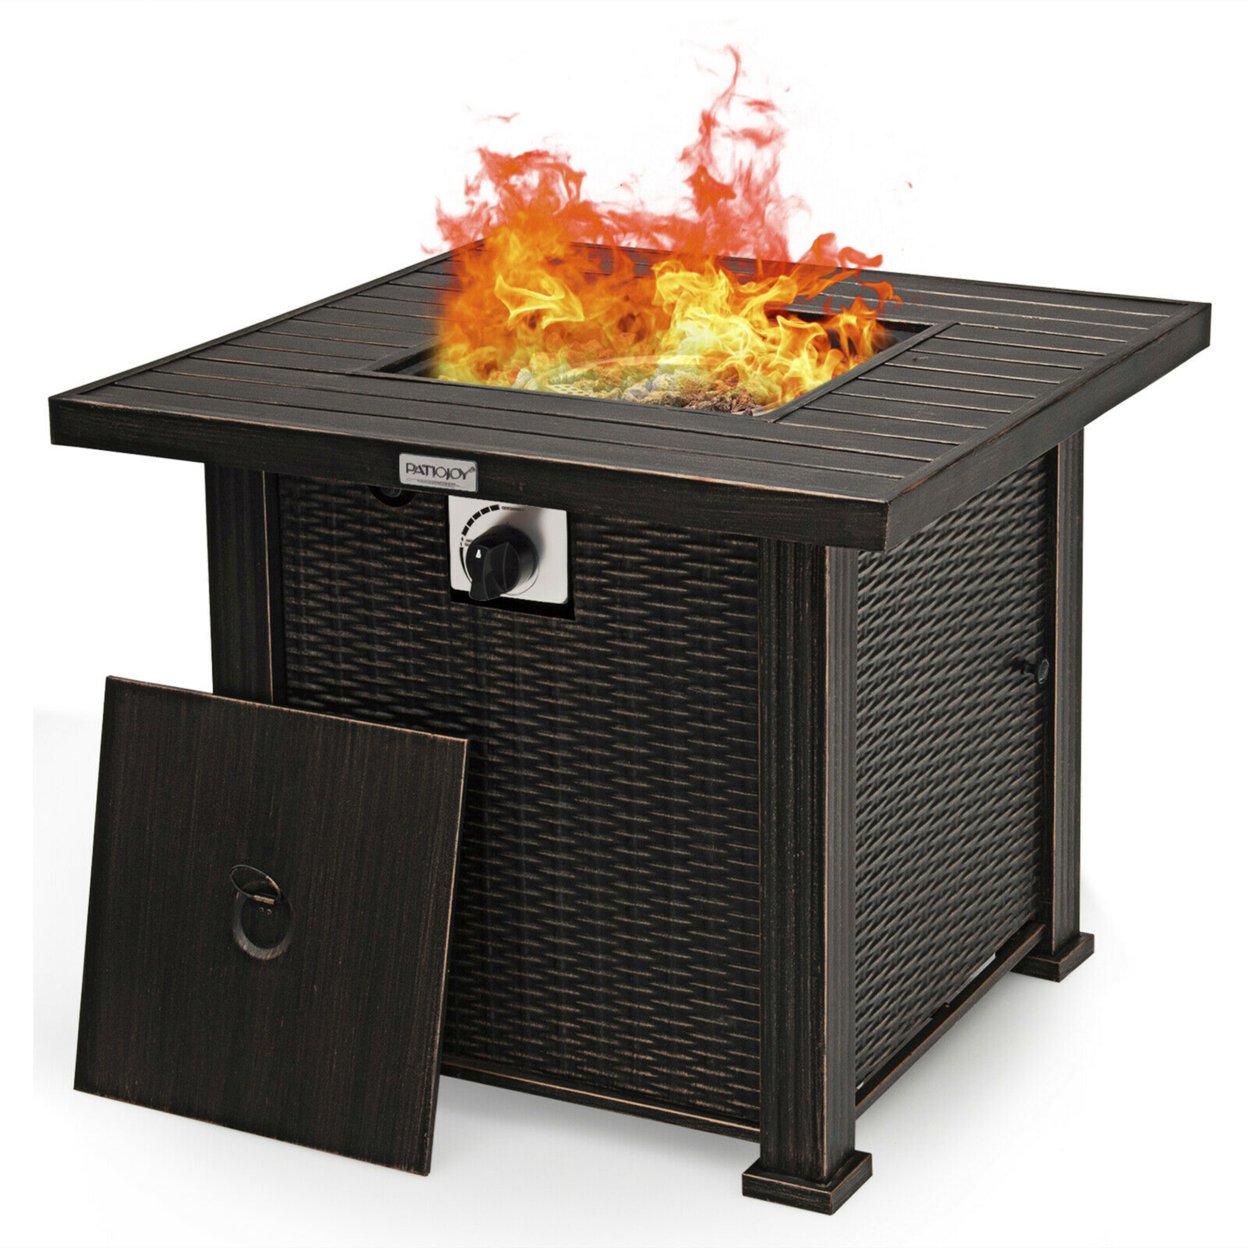 30 Gas Fire Pit Table 50,000 BTU Square Propane Fire Pit Table W/ Cover